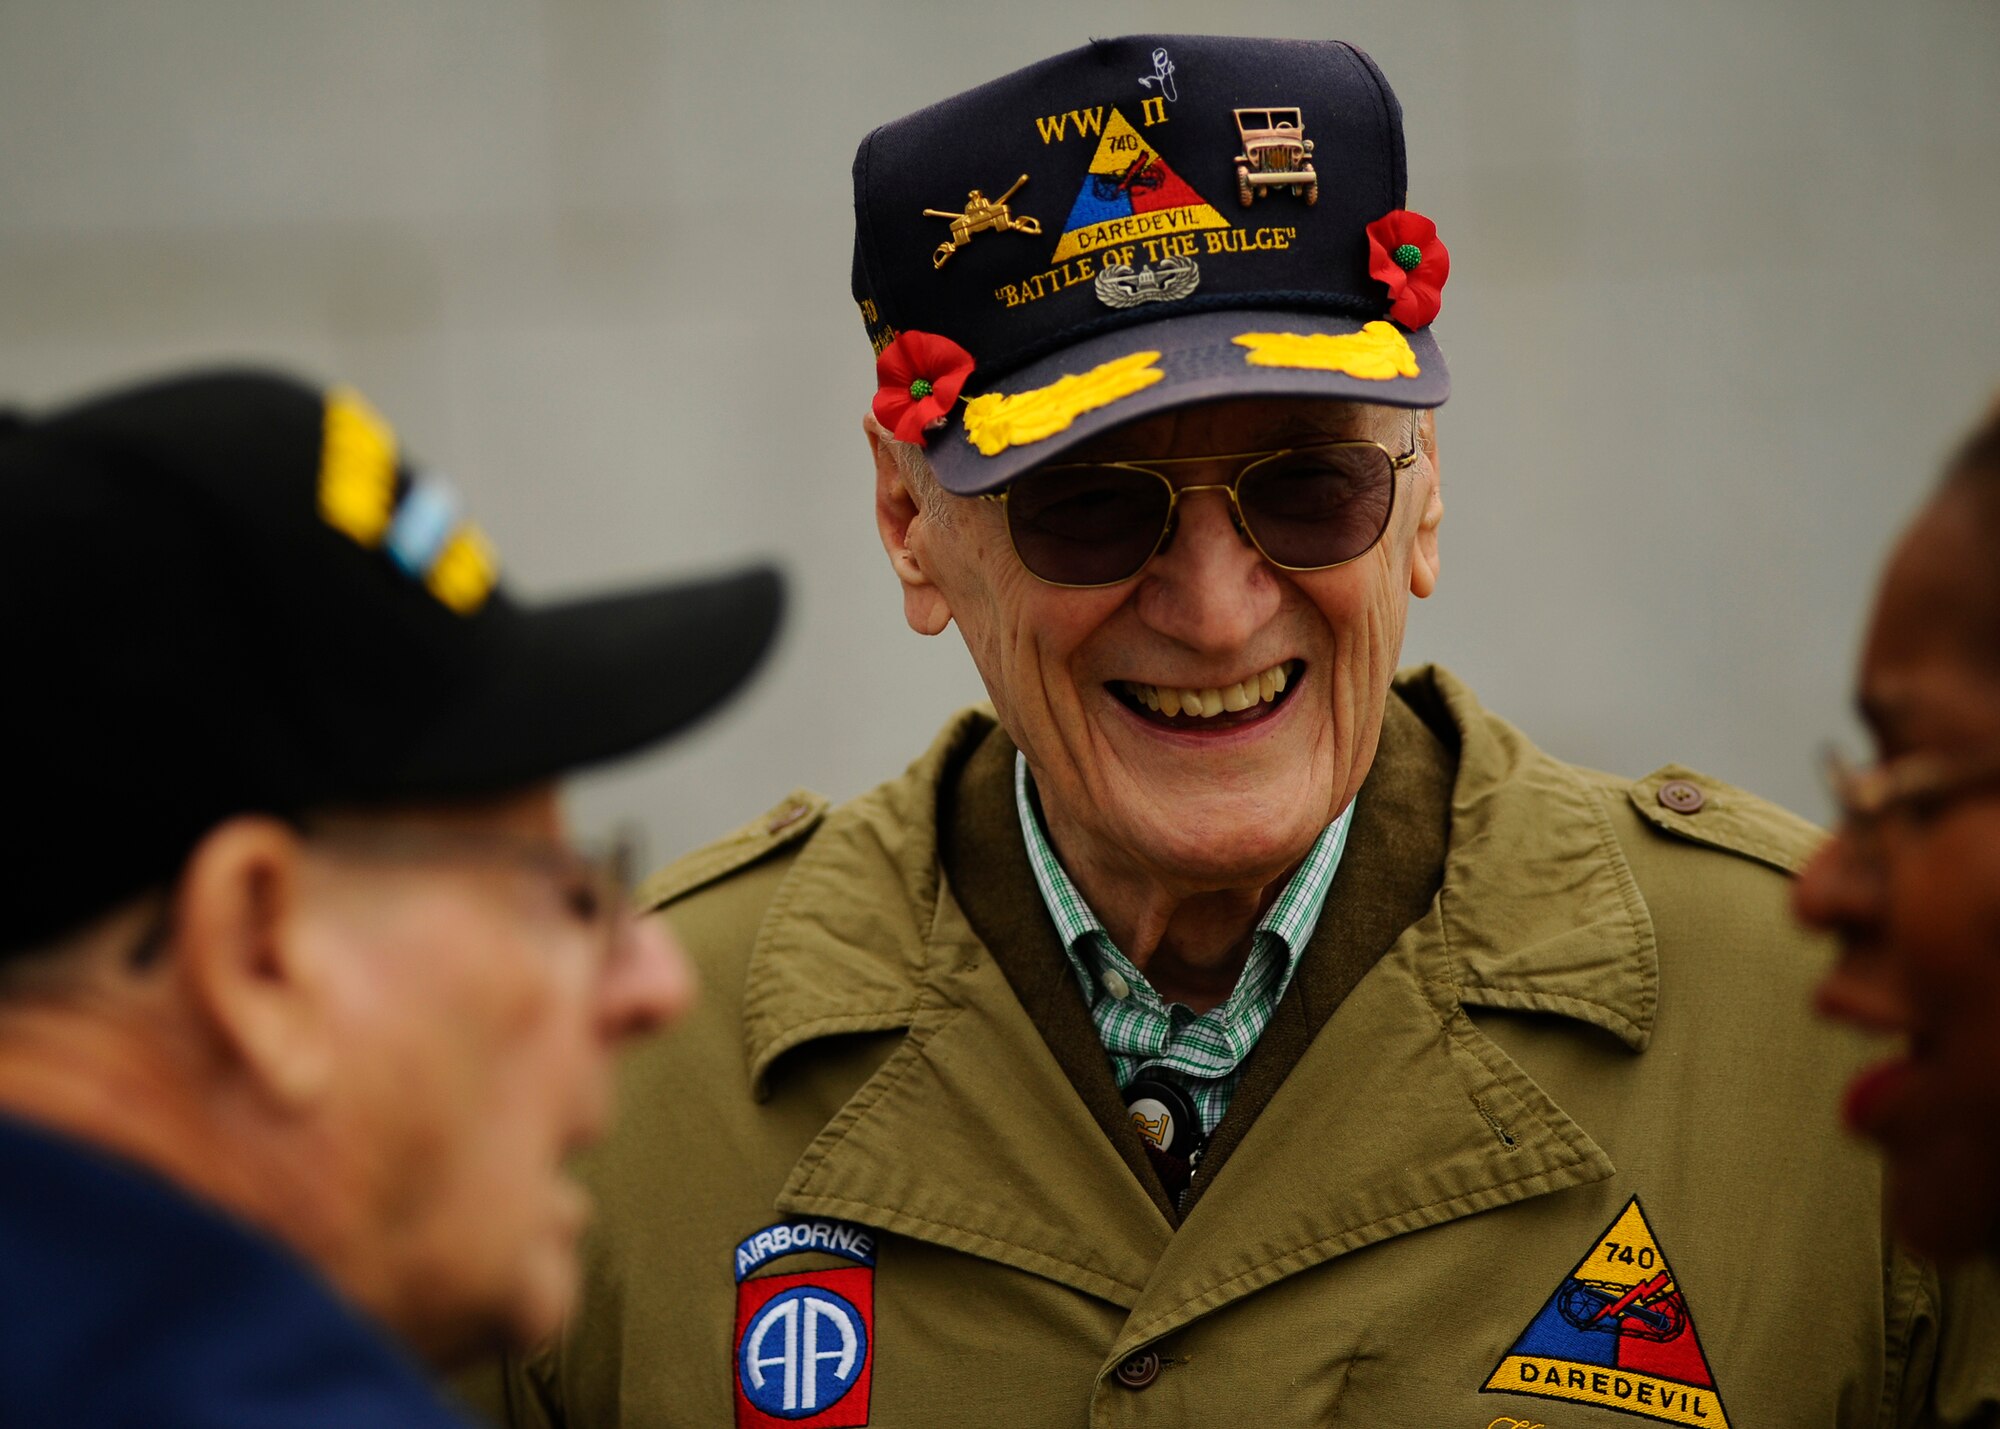 Harry Miller and Harold Bradley, both World War II veterans, reminisce at the National World War II Memorial in Washington D.C., April 30, 2016. Bradley and Miller served in the same unit for the Army at the Battle of the Bulge. The Honor Flight Network is a nonprofit organization that provides America’s veterans a free trip to the nation’s capital to visit memorials. (U.S. Air Force photo/Tech. Sgt. Bryan Franks)